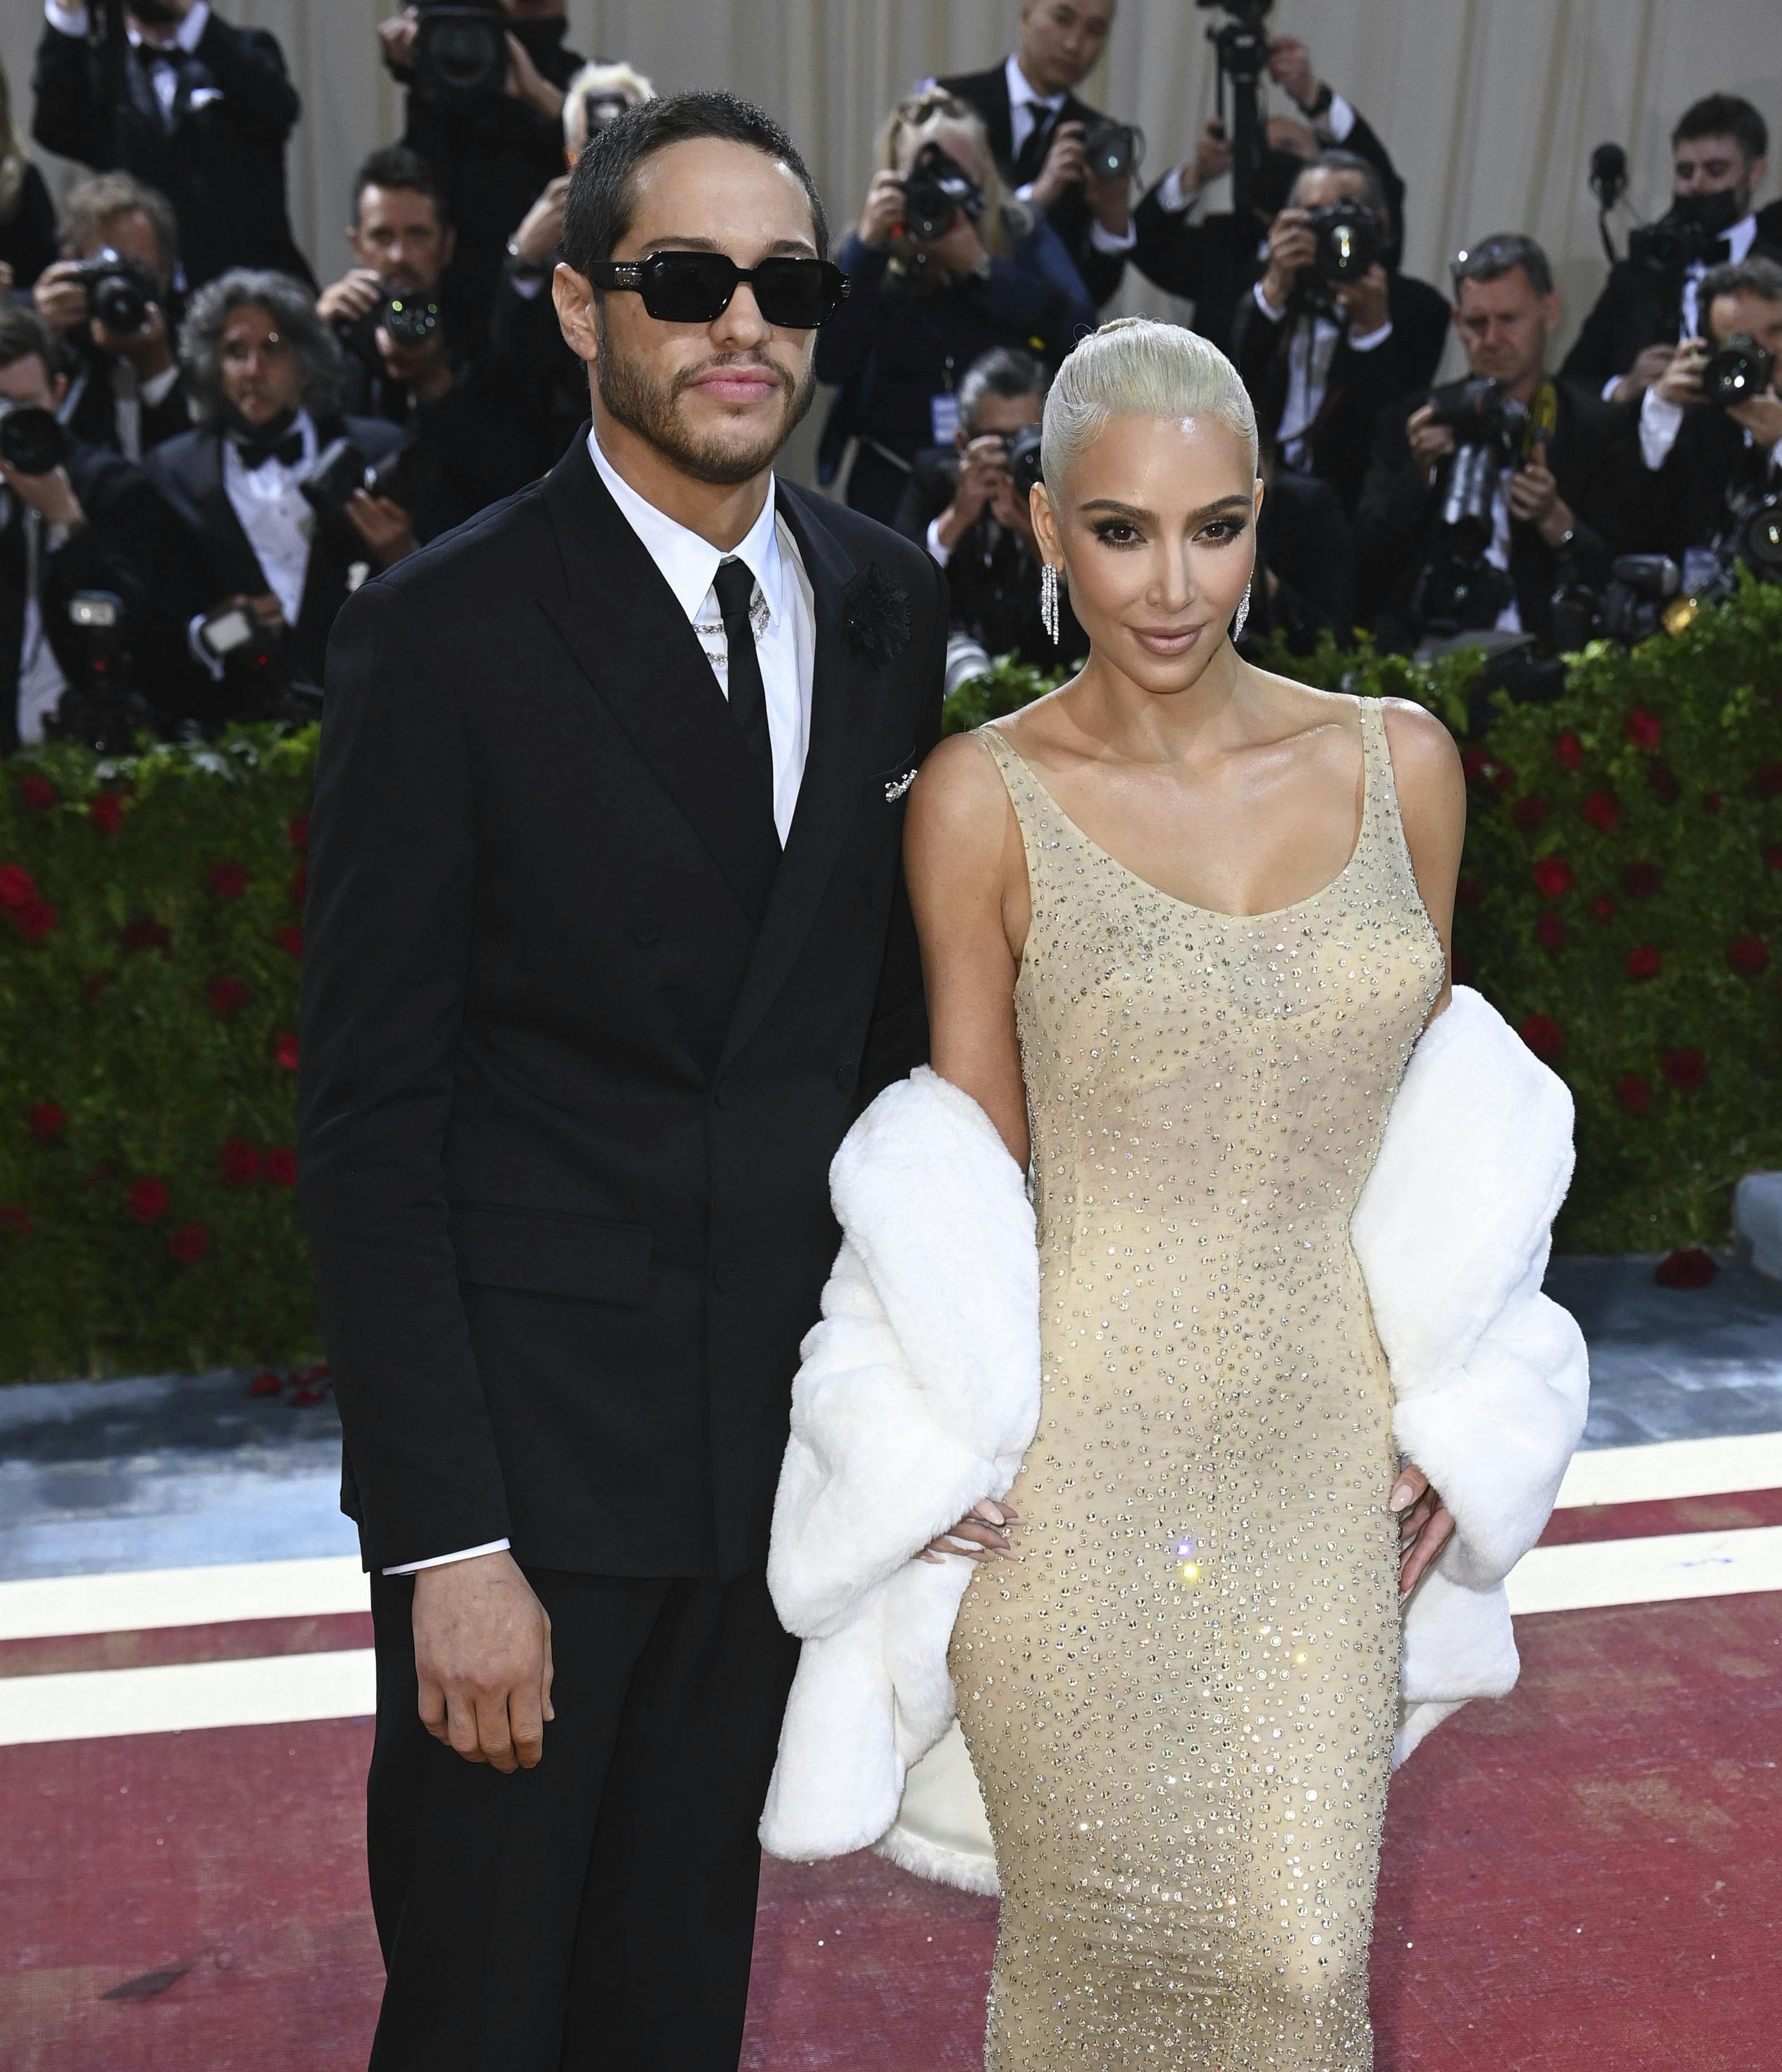 AUGUST 5th 2022: Kim Kardashian and Pete Davidson have split up and ended their relationship after nine months of dating. - File Photo by: zz/DPRF/STAR MAX/IPx 2022 5/2/22 Kim Kardashian and Pete Davidson at the 2022 Costume Institute Benefit Gala celebrating the opening of "In America: An Anthology of Fashion" held on May 2, 2022 at The Metropolitan Museum of Art in New York City. (NYC)